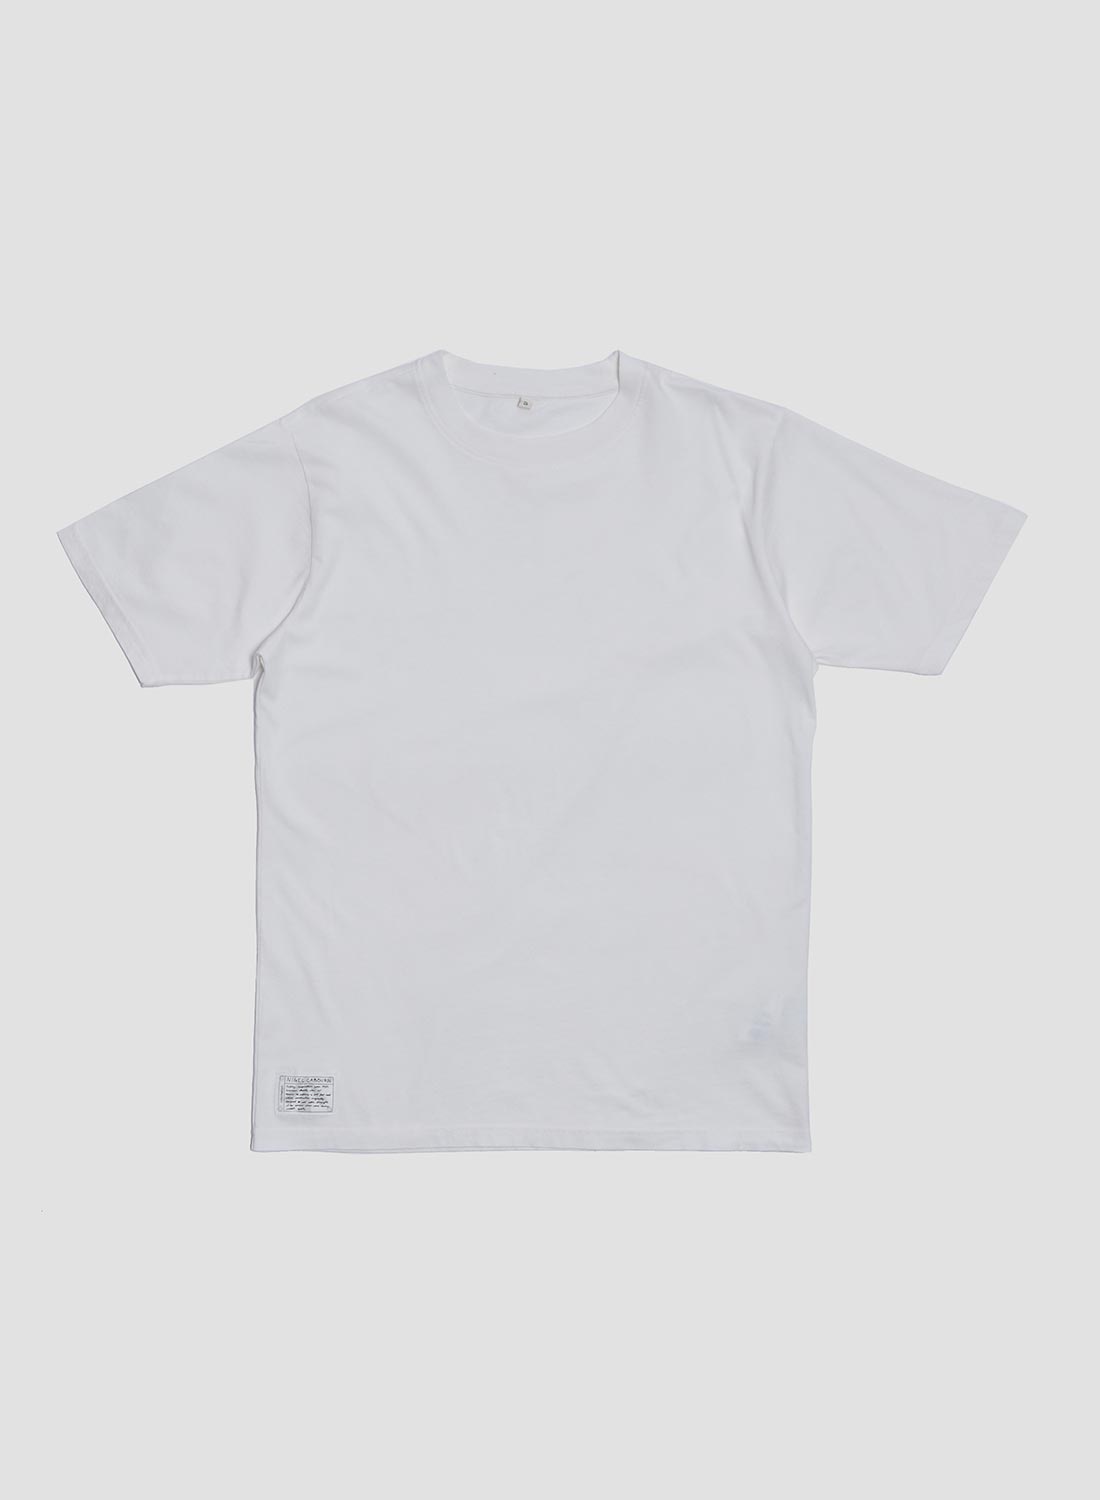 Classic Relaxed Fit Tee in Stone Wash White - 1